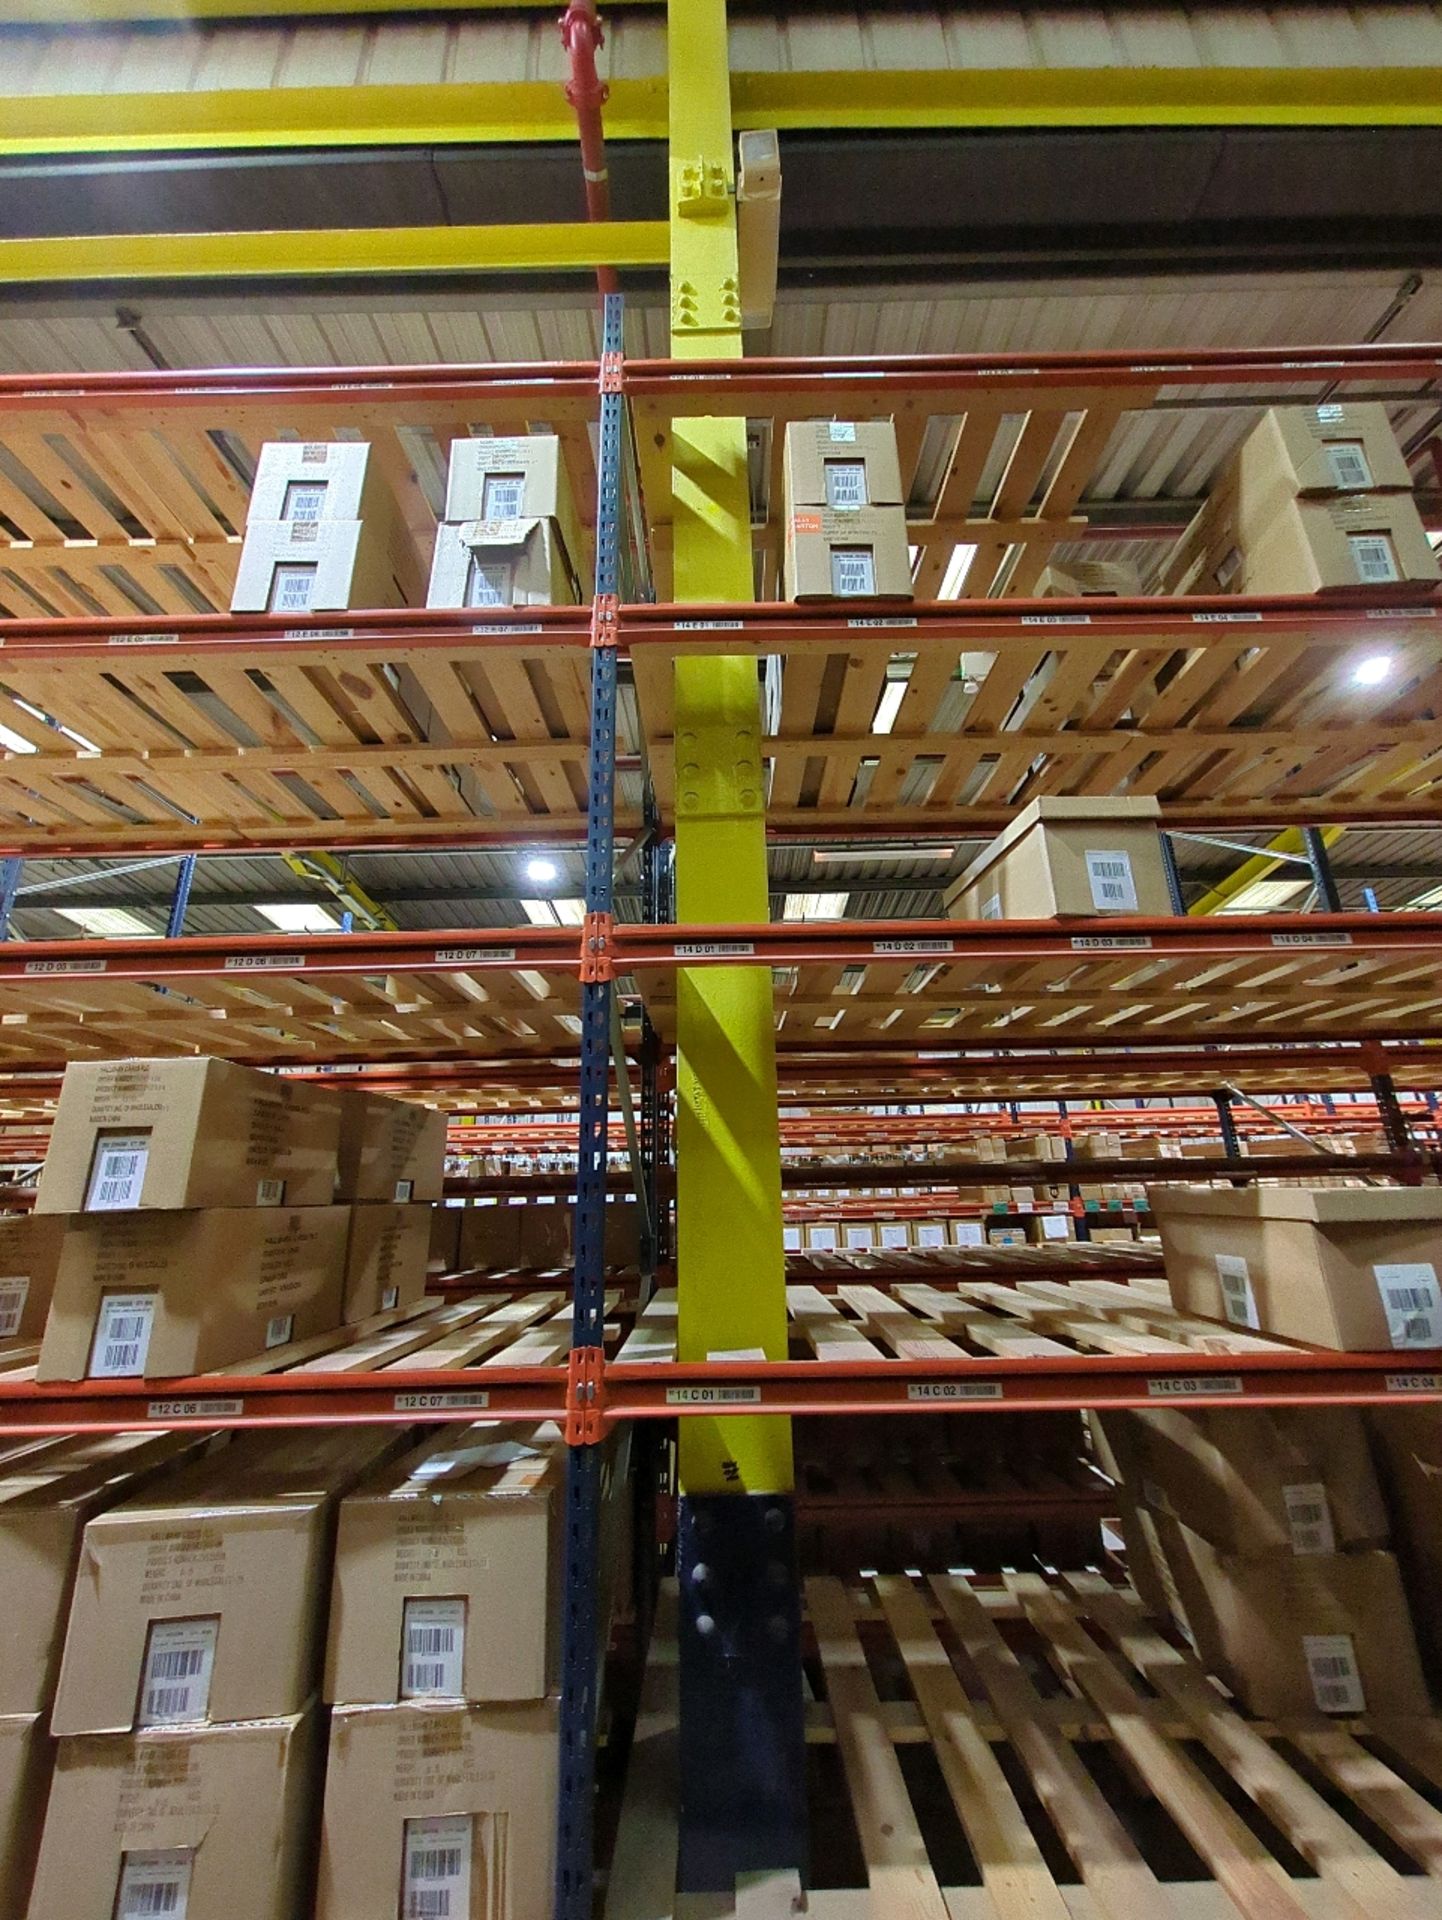 Run Of 9 Bays Of Boltless Industrial Pallet Racking - Image 8 of 13